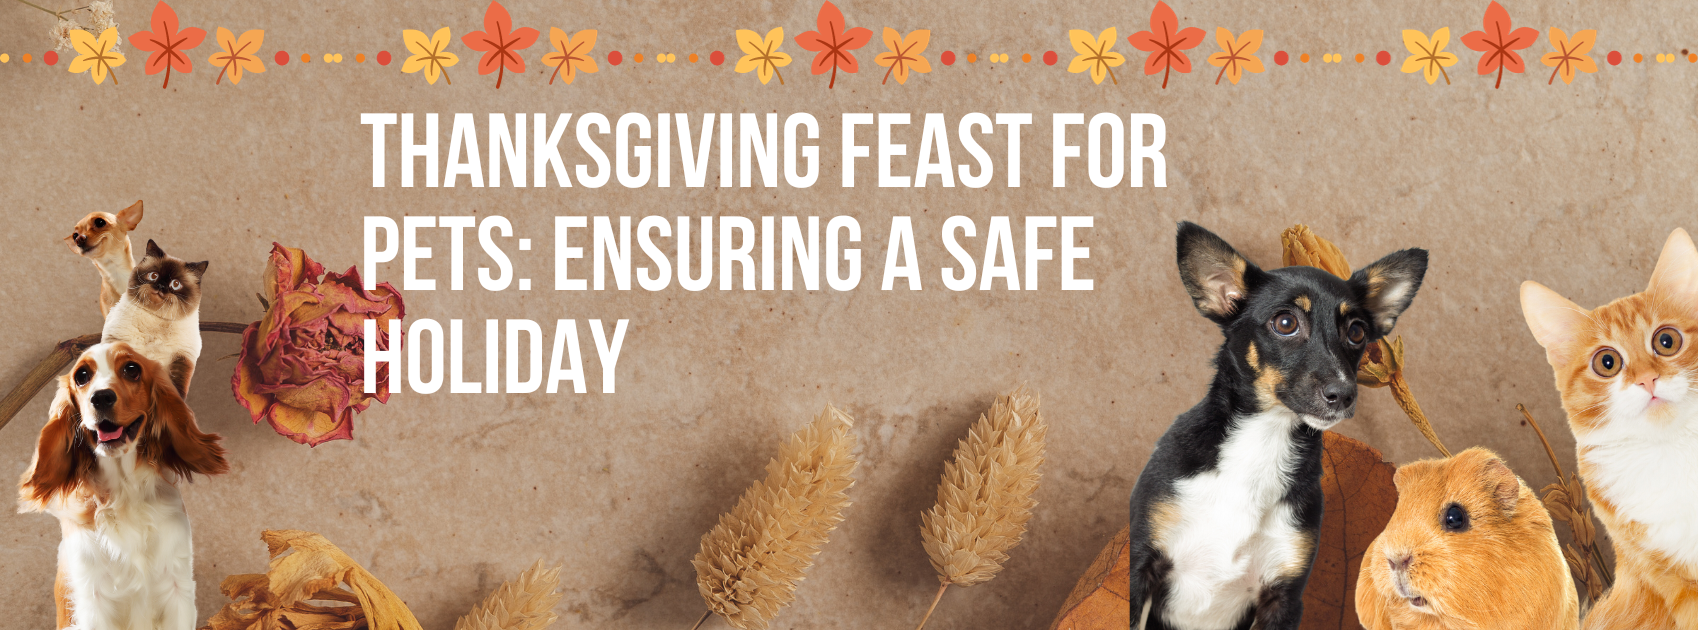 Thanksgiving feast for pets: Ensuring a safe holiday